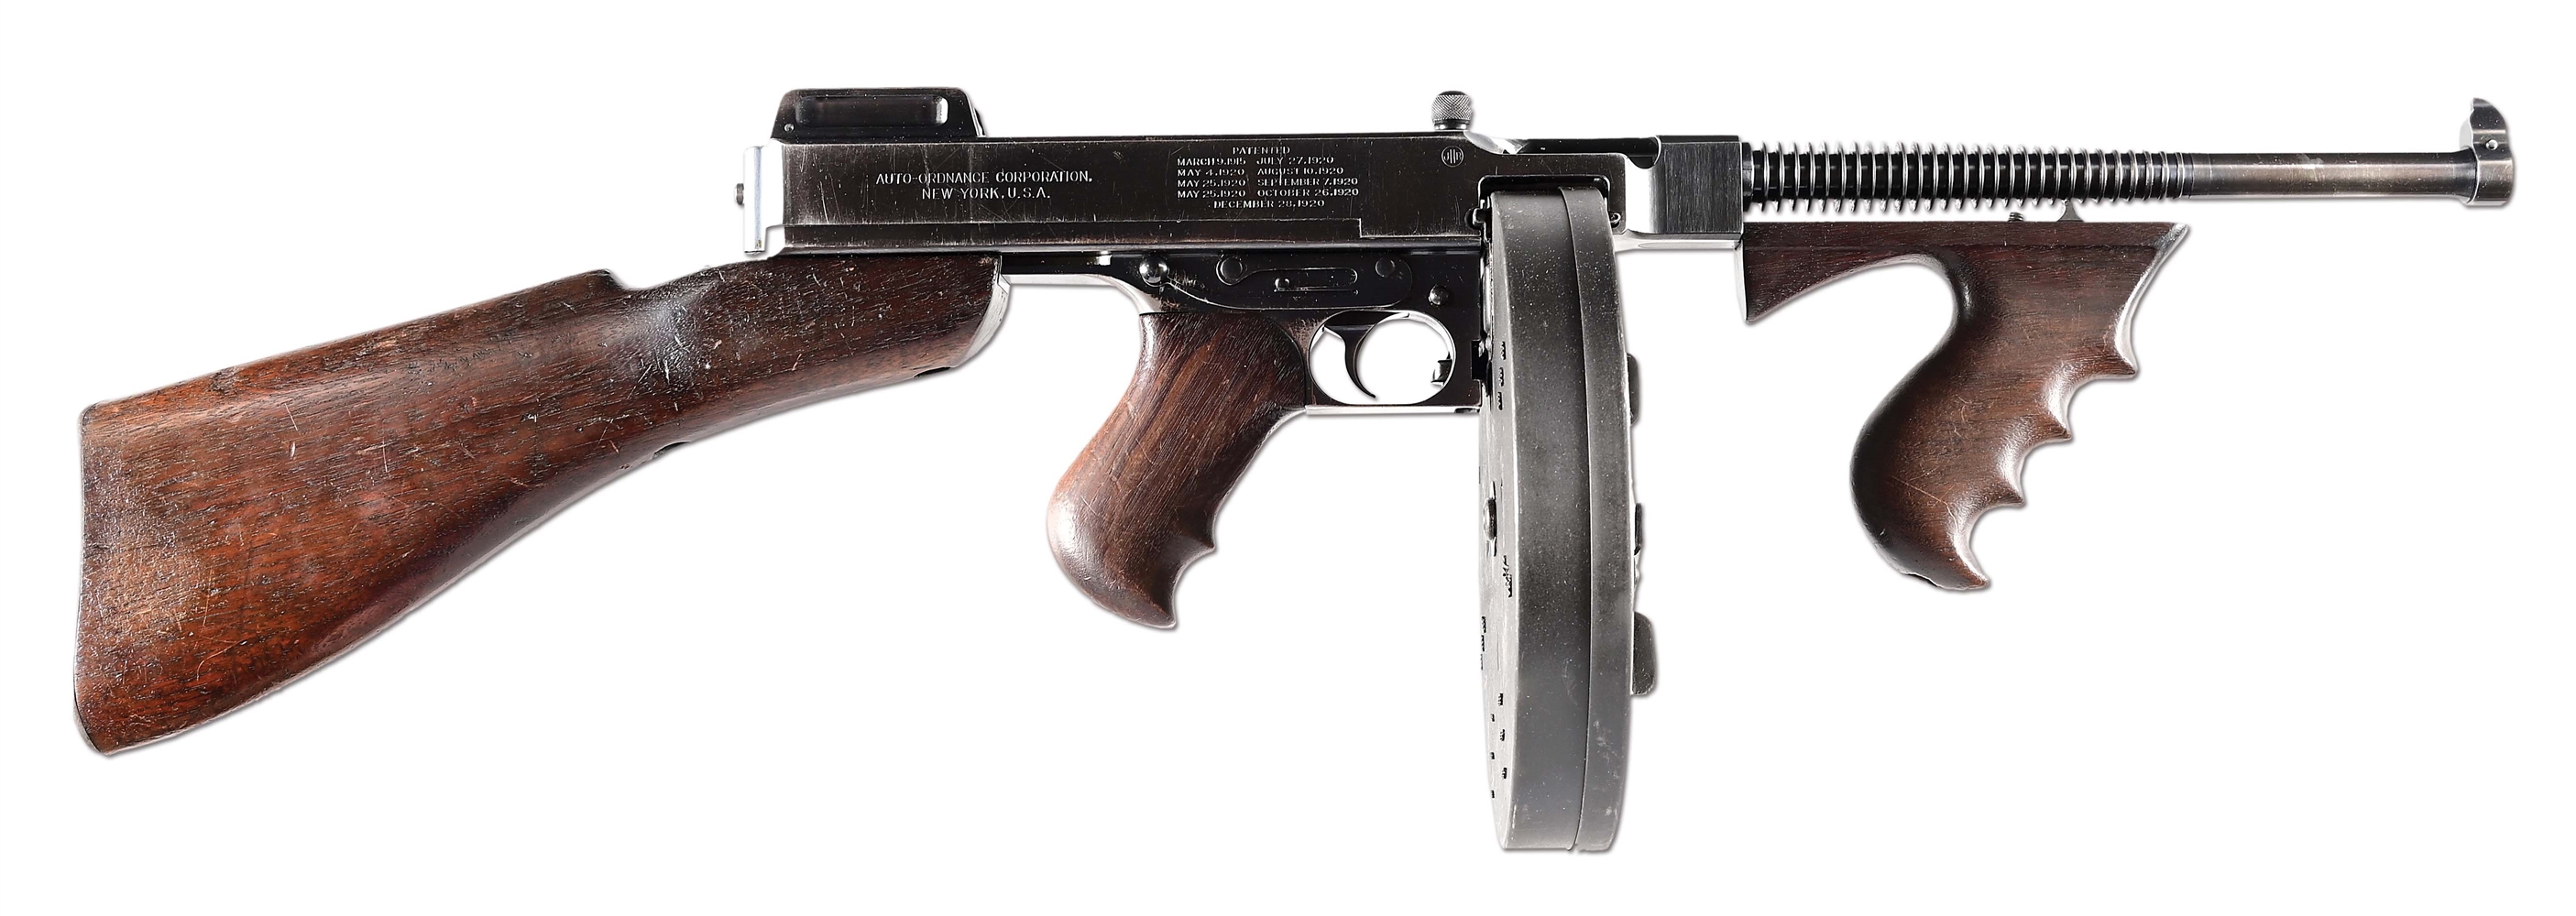 (N) FANTASTIC ORIGINAL CONDITION LOW SN COLT 1921A THOMPSON 1921 MACHINE GUN WITH MATCHING NUMBERED "C" DRUM (CURIO AND RELIC).